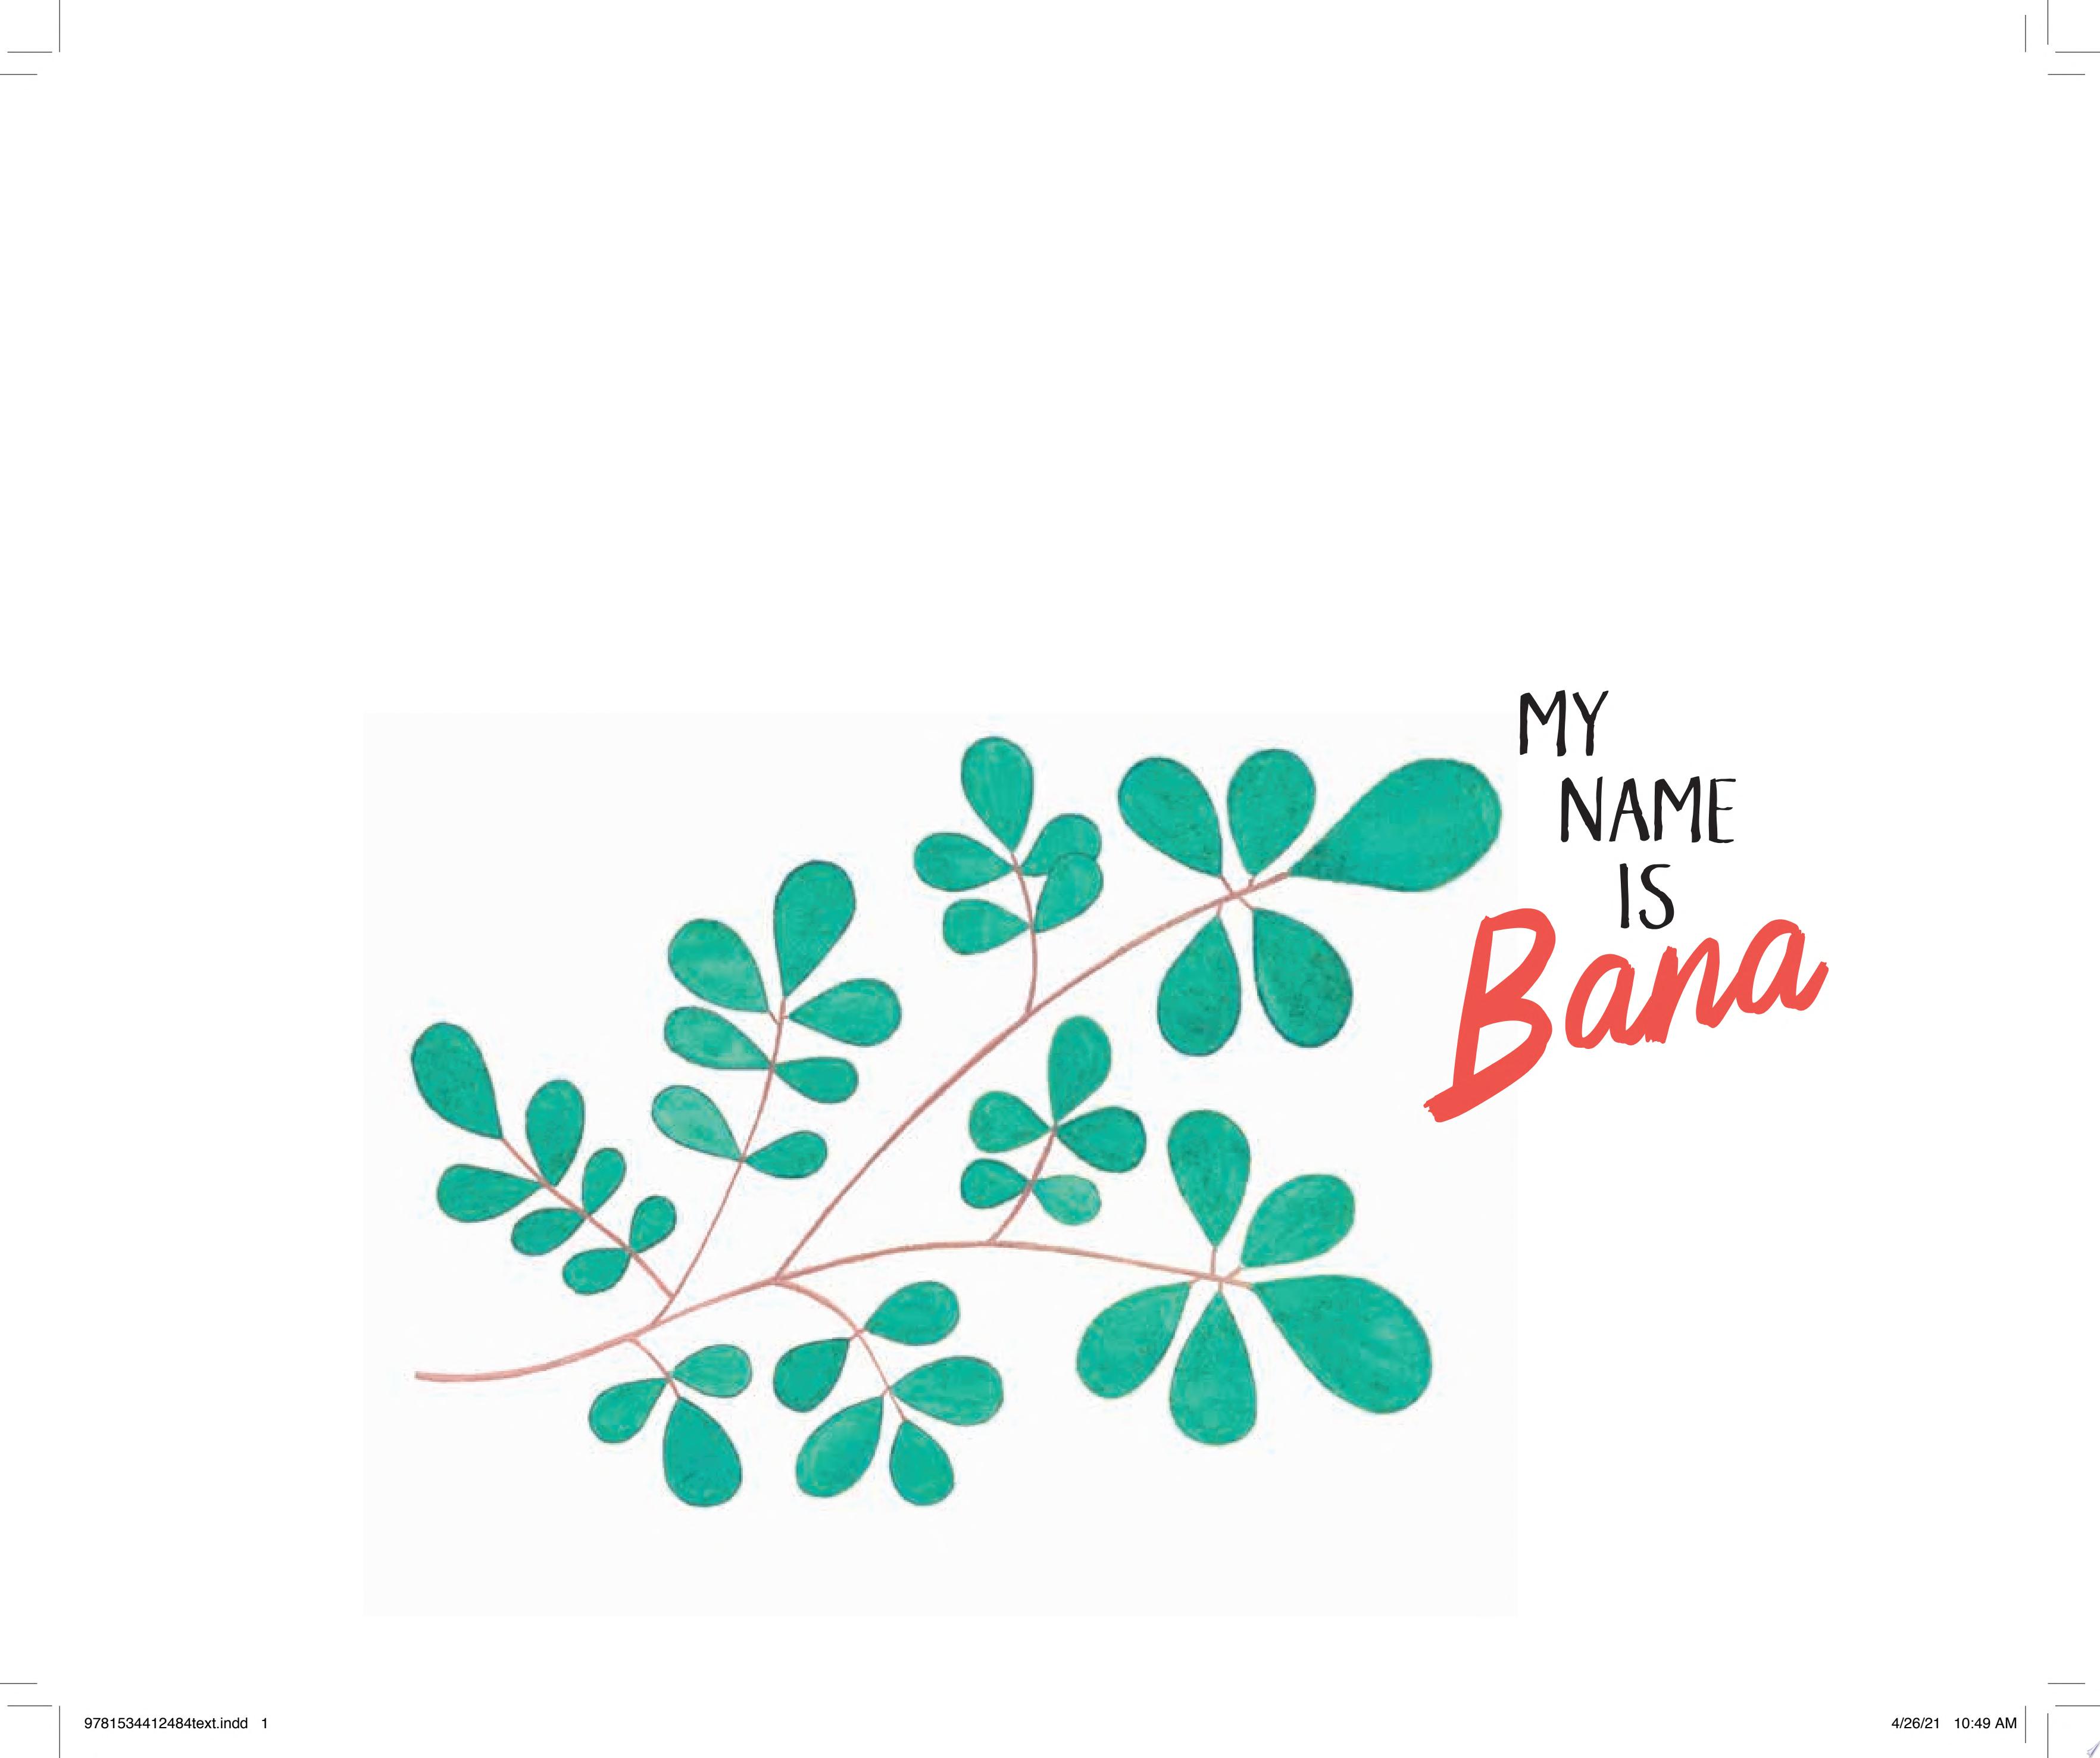 Image for "My Name Is Bana"